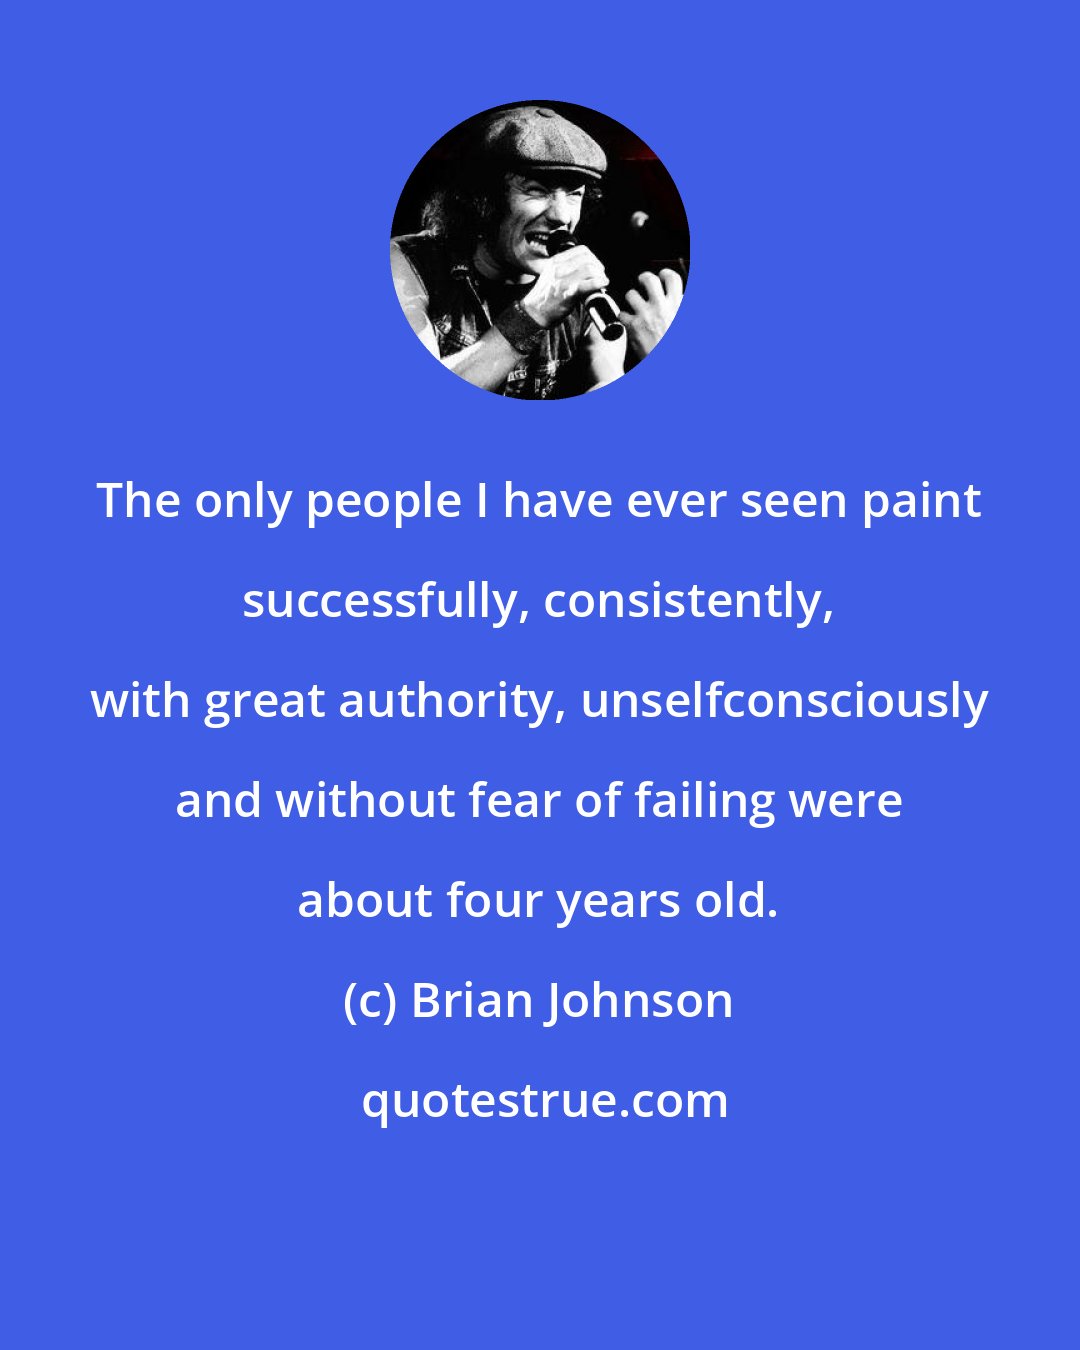 Brian Johnson: The only people I have ever seen paint successfully, consistently, with great authority, unselfconsciously and without fear of failing were about four years old.